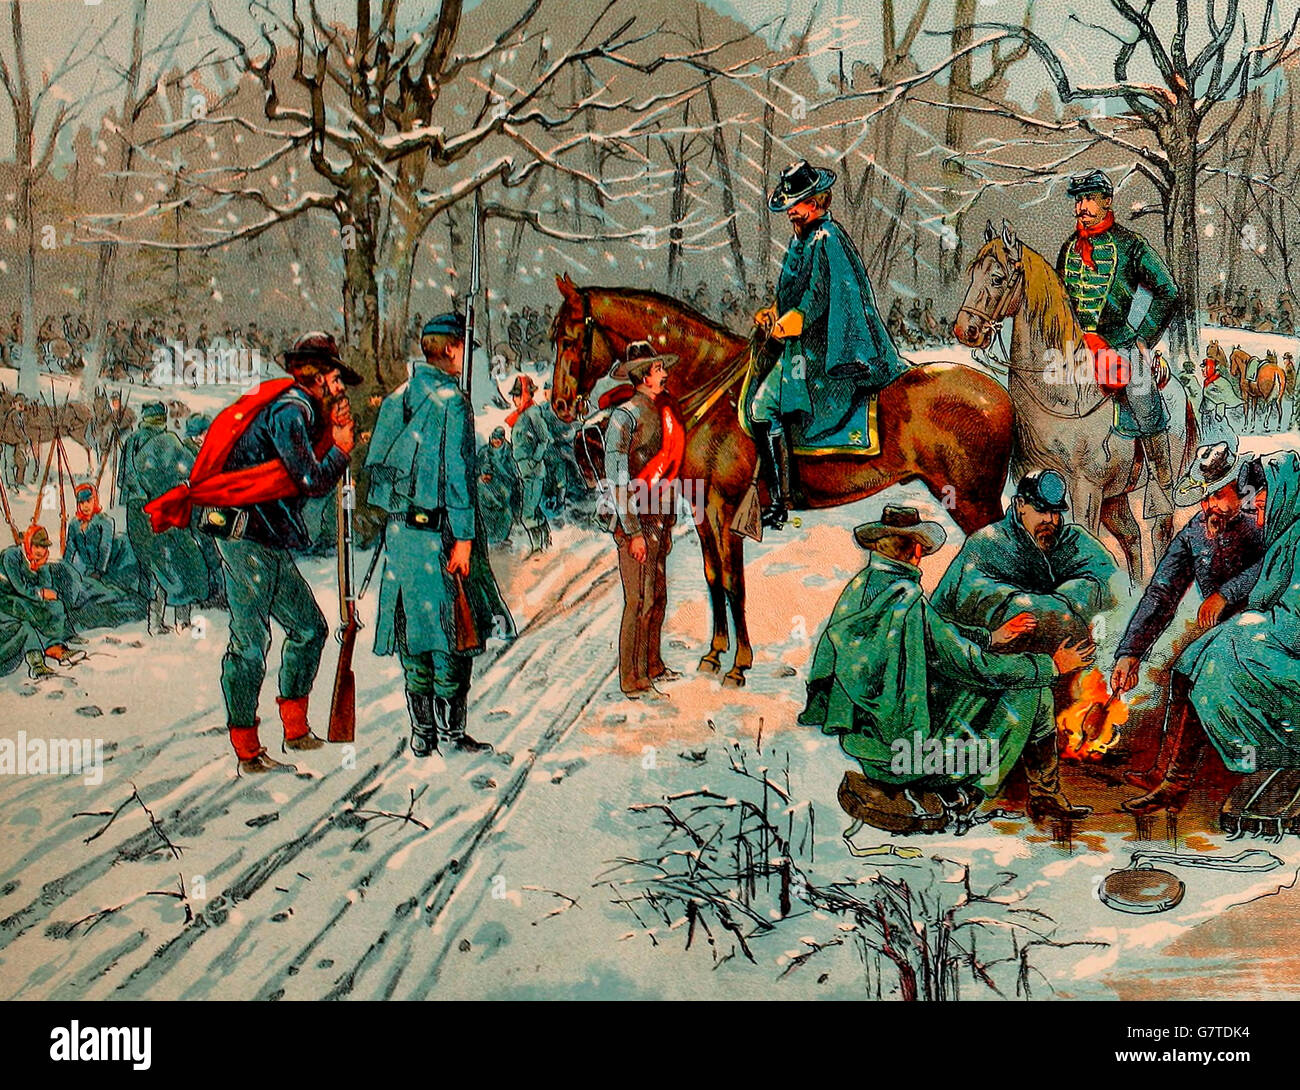 Fort Donelson Surrendered February 18, 1862 - The Bivouac before the battle. USA Civil War Stock Photo